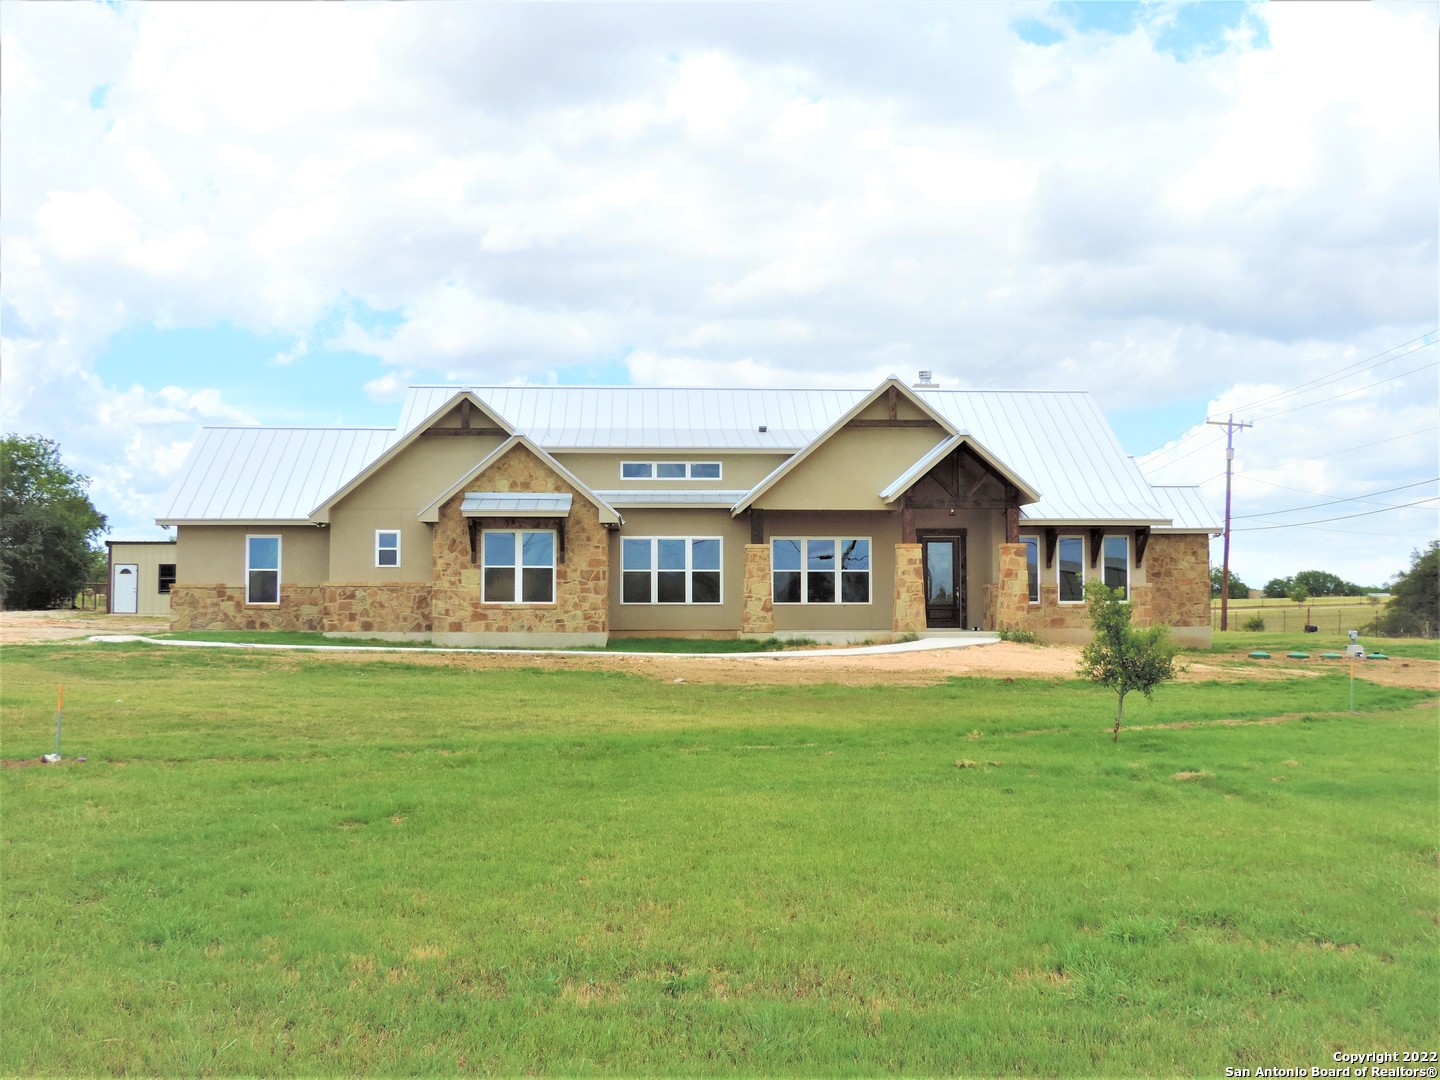 GORGEOUS OPPORTUNITY TO OWN THIS NEW ONE-STORY CUSTOM HOME ON A 1.9 ACRE CORNER LOT!!  THIS NEW HOME FEATURES OVER 3,200 SQUARE FEET OF LIVING/ENTERTAINING SPACE. NEW OWNERS WILL ENJOY QUIET COUNTRY LIVING/OPEN ISLAND EAT IN KITCHEN/FLOOR TO CEILING STONE FIREPLACE/EIGHT FOOT DOORS THROUGHOUT/SOARING GAMEROOM CEILING/SUNROOM/BEAUTIFUL OWNERS RETREAT WITH A CUSTOM BATH/WALK-IN CUSTOM SHOWER AND A GREAT SIZED WALK-IN CLOSET.  READY FOR A QUICK MOVE IN.  NEW SEPTIC SYSTEM. THIS CUSTOM HOME SIMPLY SPEAKS FOR ITSELF.  SELLER IS WILLING TO ENTERTAIN OFFERS FOR THE AQUARIUM.  VERIFY ALL MEASUREMENTS.  CONTACT US FOR YOUR EXCLUSIVE SHOWCASING TODAY.